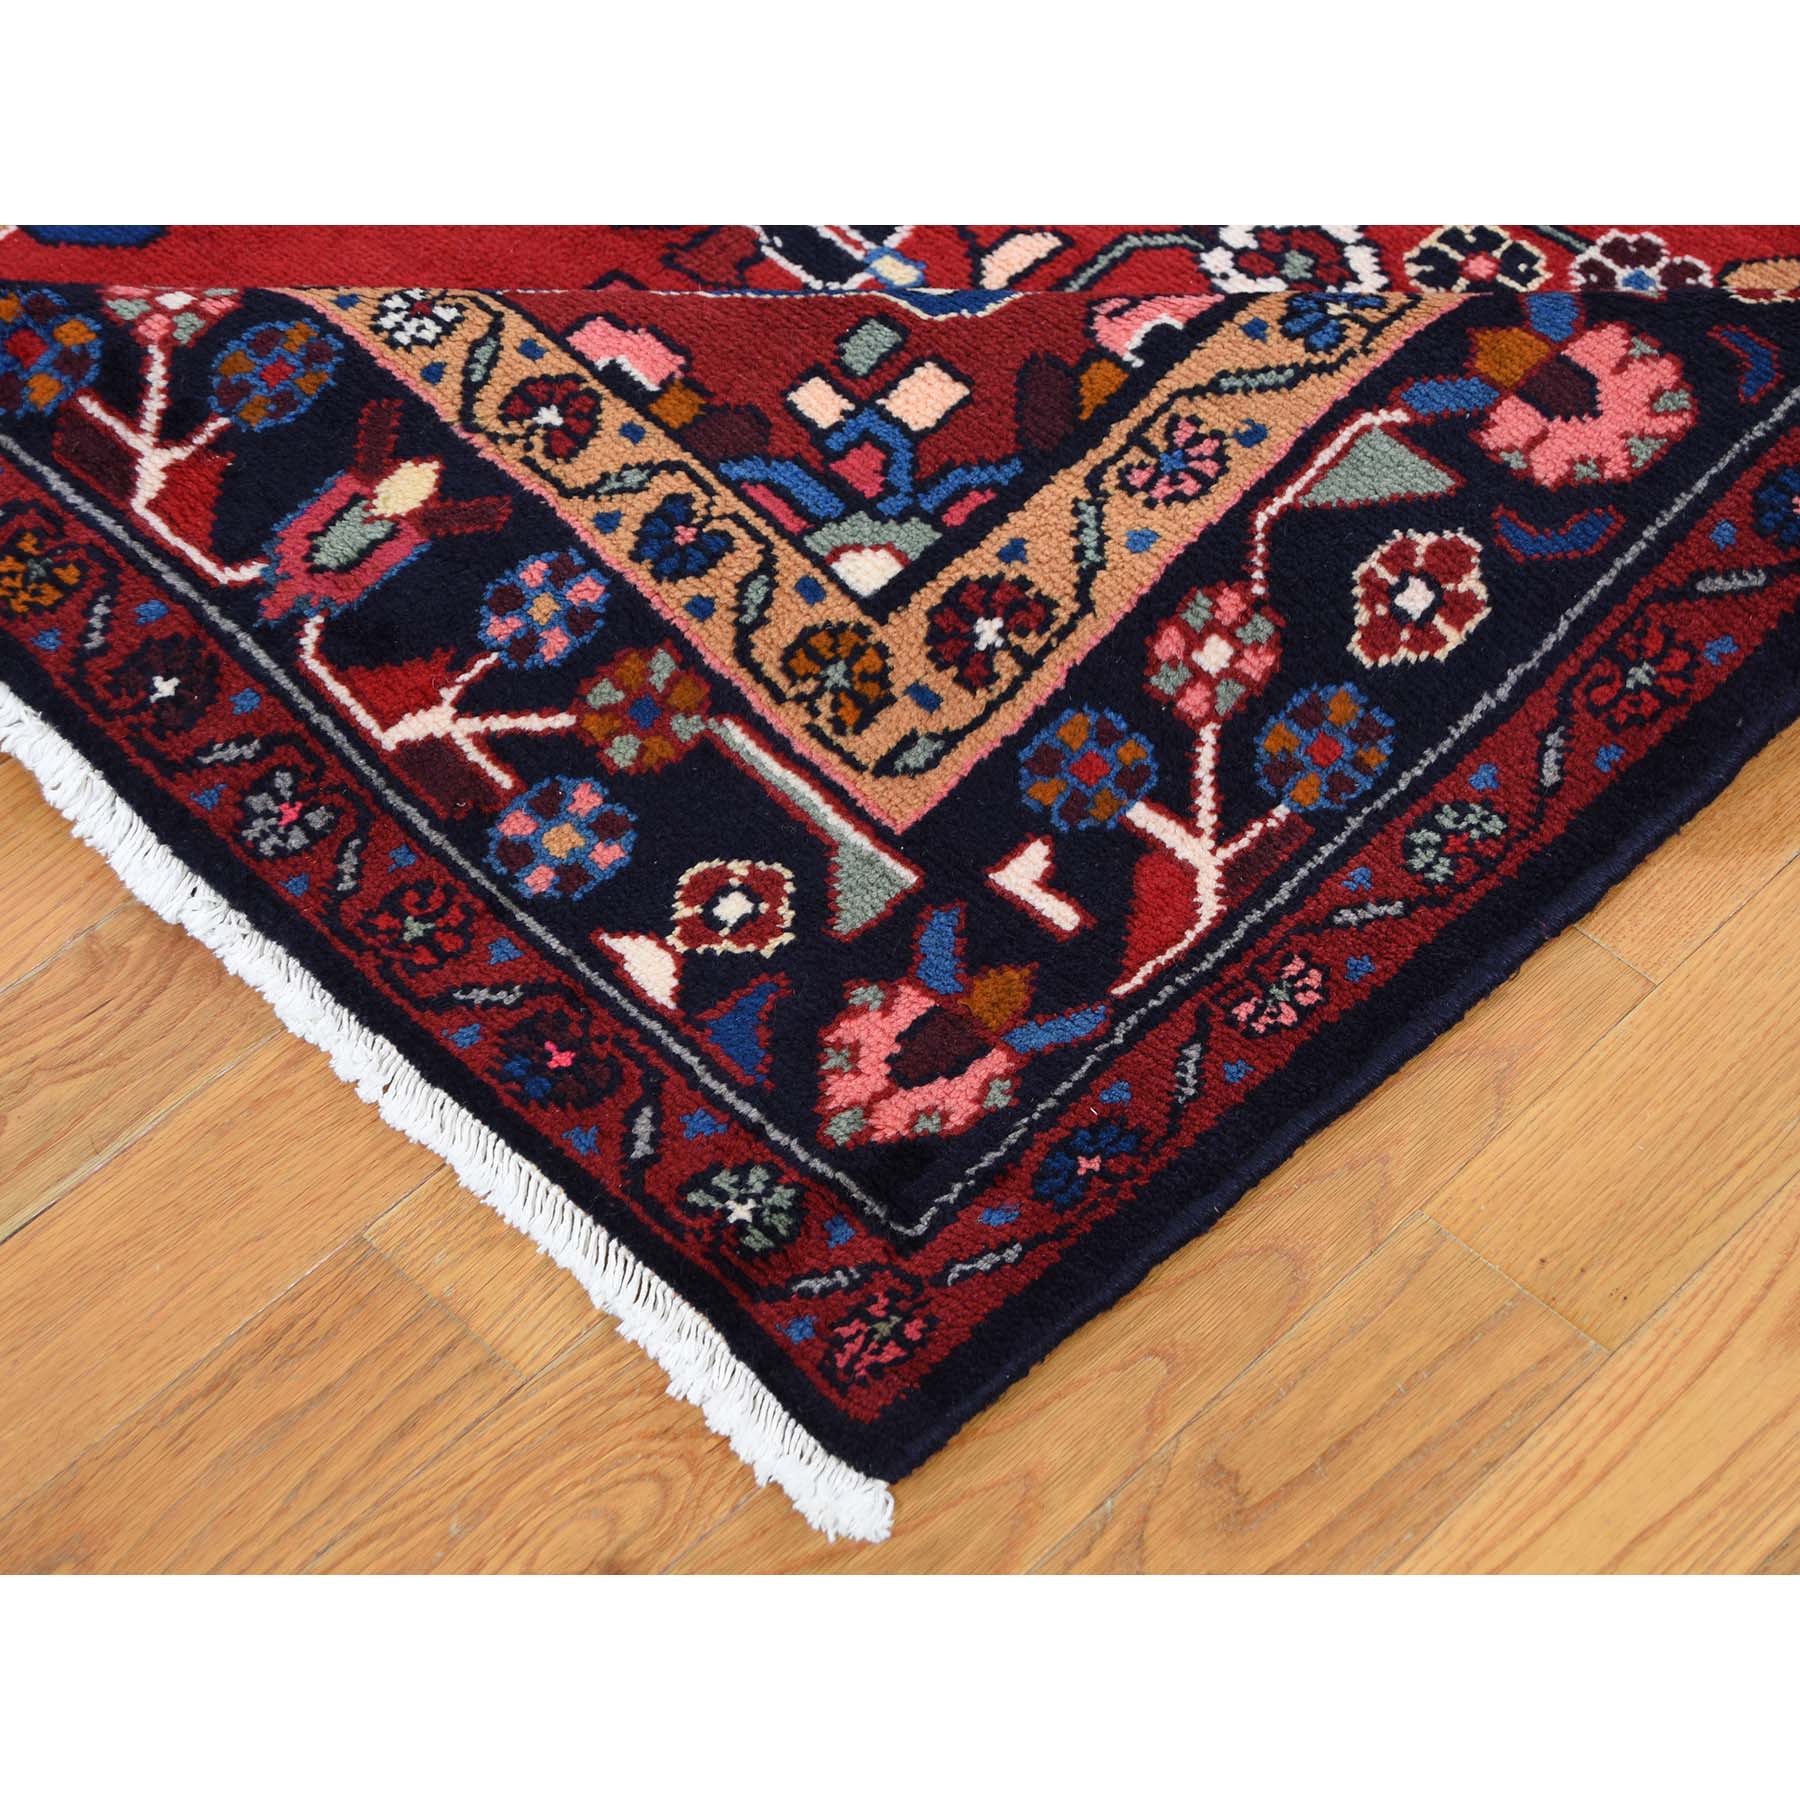 7-2 x9-7  Red New Persian Hamadan Pure Wool Hand-Knotted Oriental Rug 